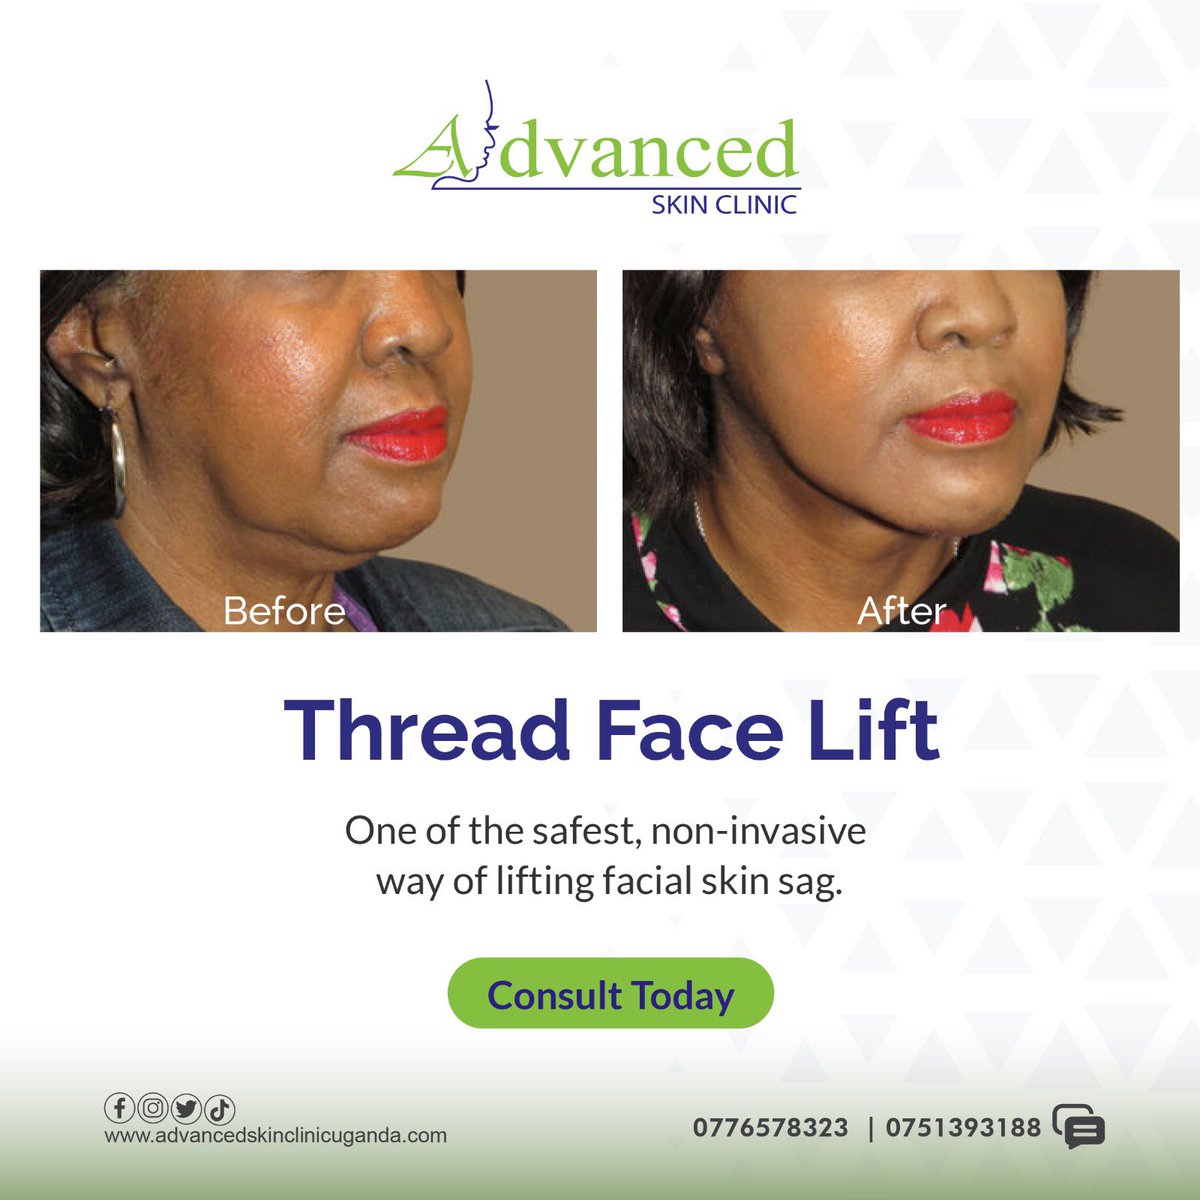 The thread lift is a minimally invasive cosmetic treatment that corrects aged or sagging skin.

Visit us for your treatment!

advancedskinclinicuganda.com/thread-lift/

#threadlift #skincare